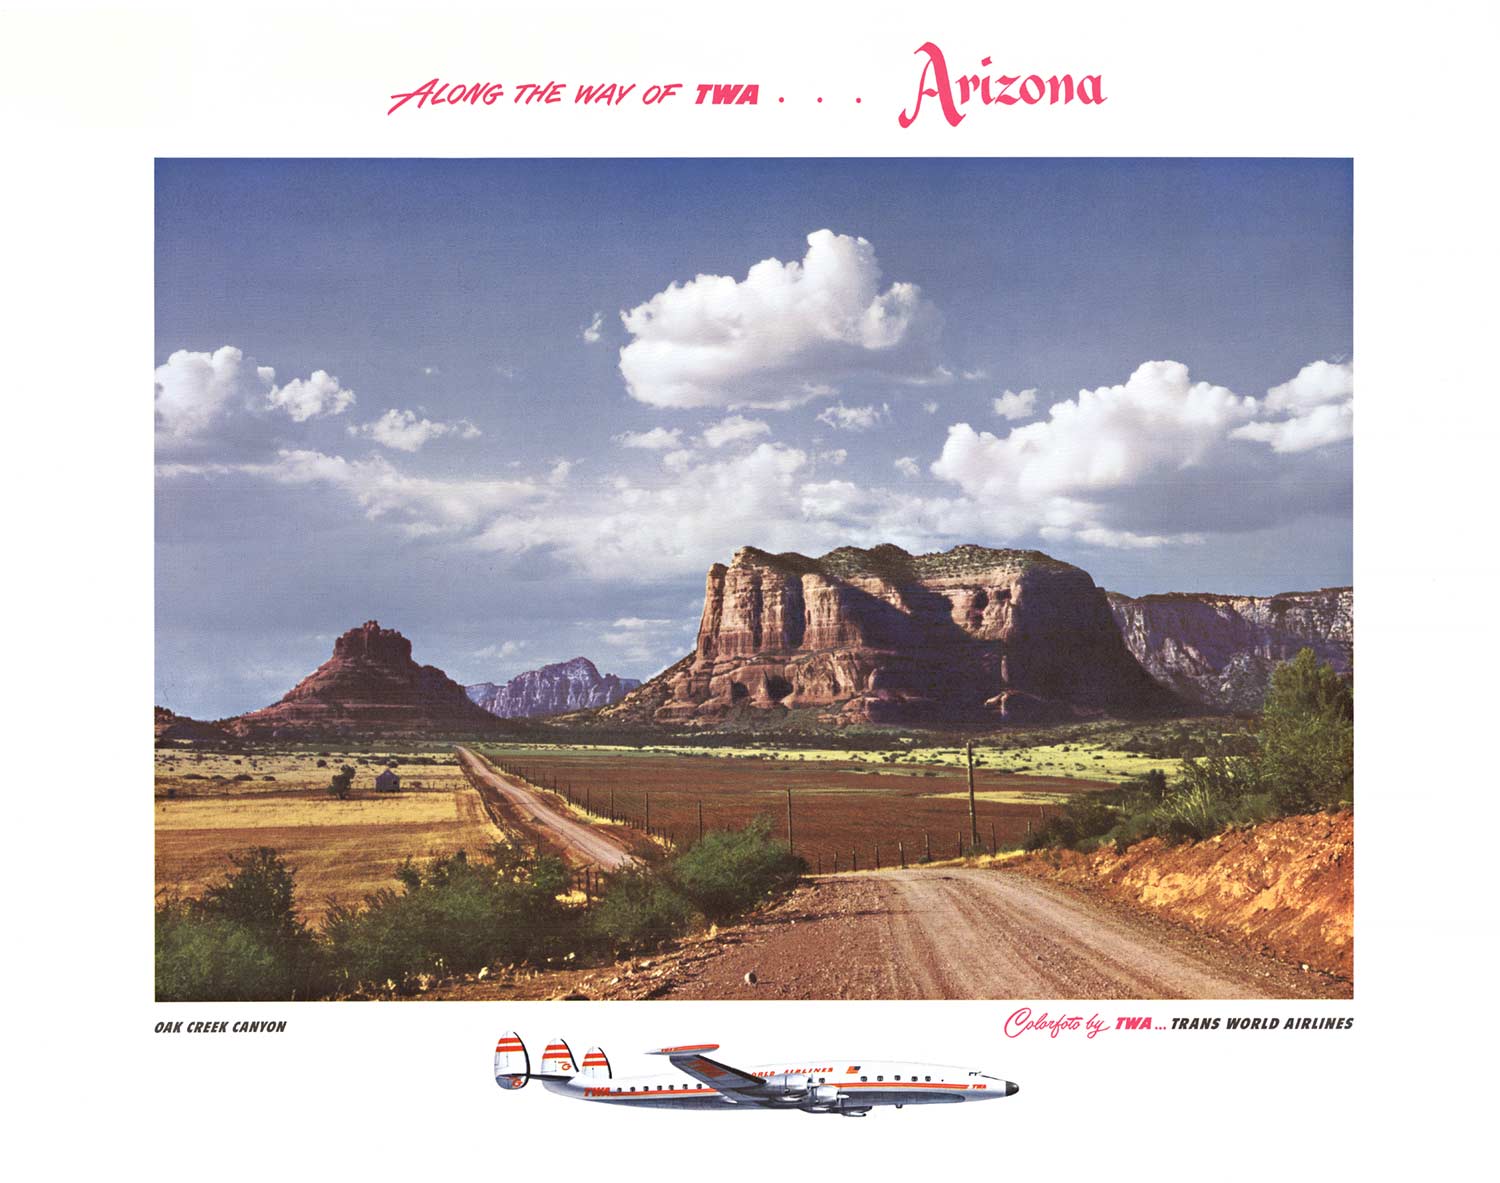 Original Arizona Oak Creek Canyon TWA Constellation aircraft vintage travel poster. <br>Archival linen backed from the 1950s <br>Excellent condition, ready to frame. Although a few of these posters for Oak Creek Canyon have survived, few if any survive